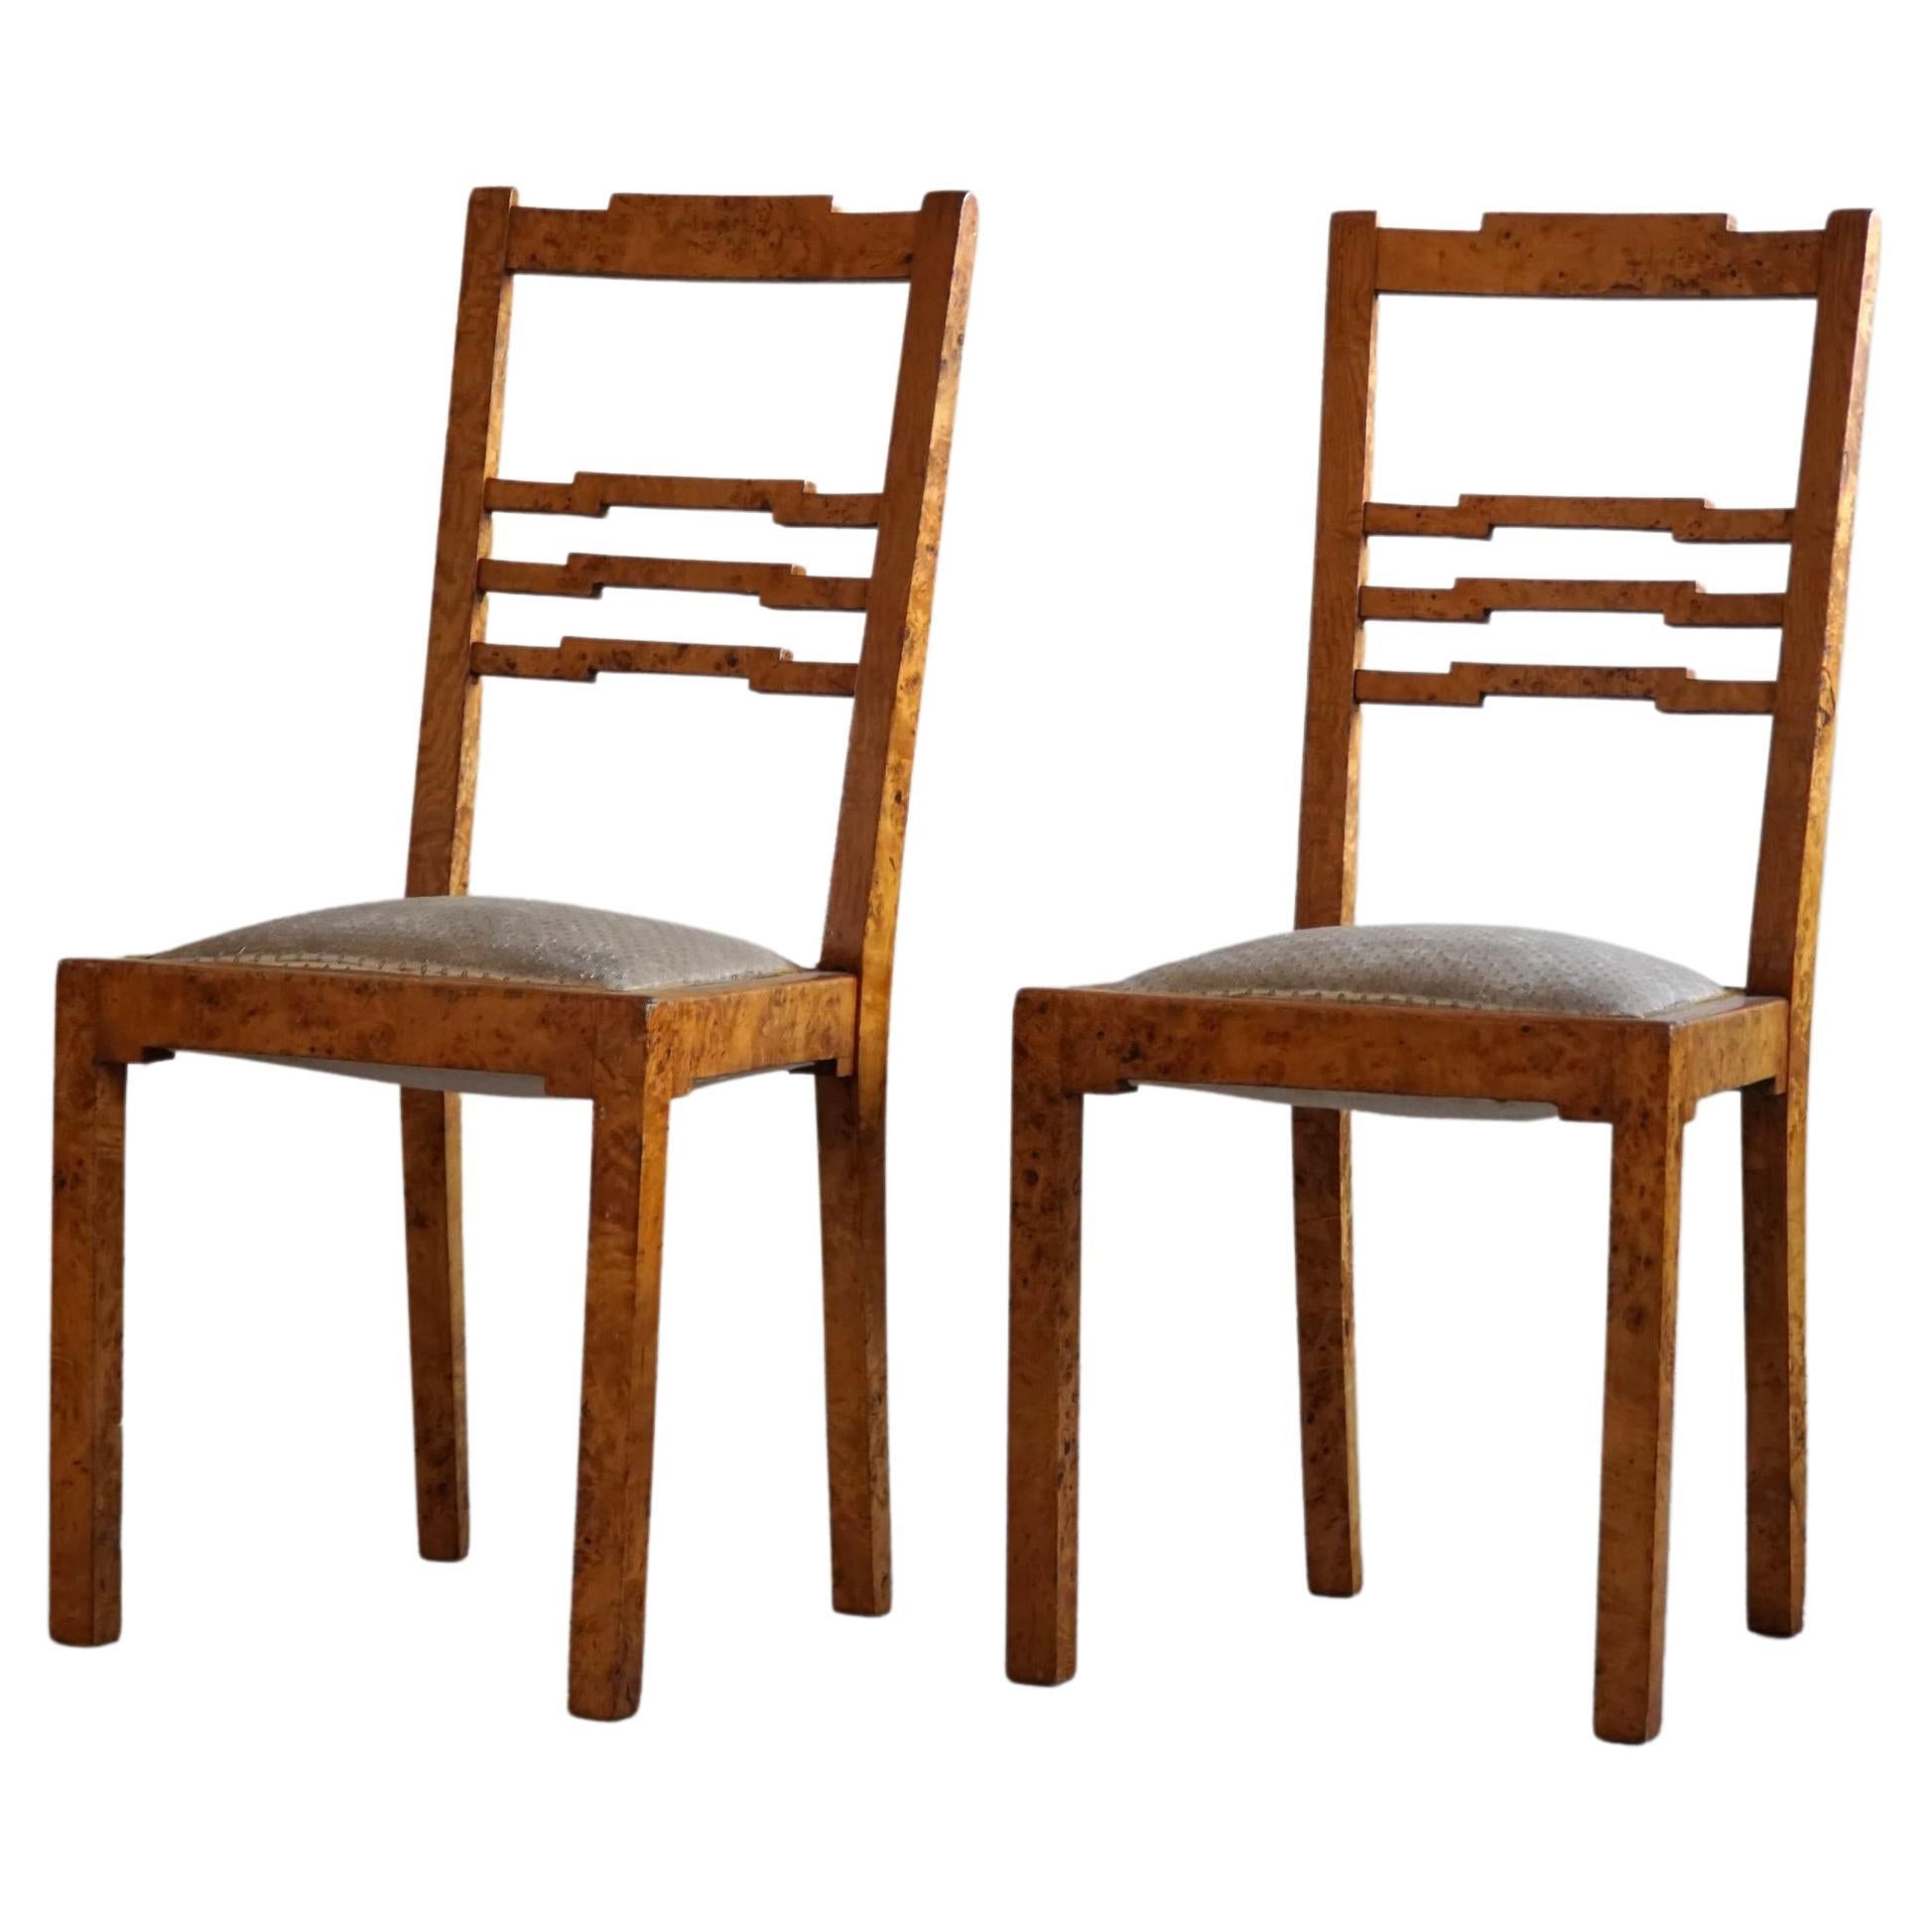 A Pair of Swedish Art Deco Dining Room Chairs in Birch, 1920s For Sale